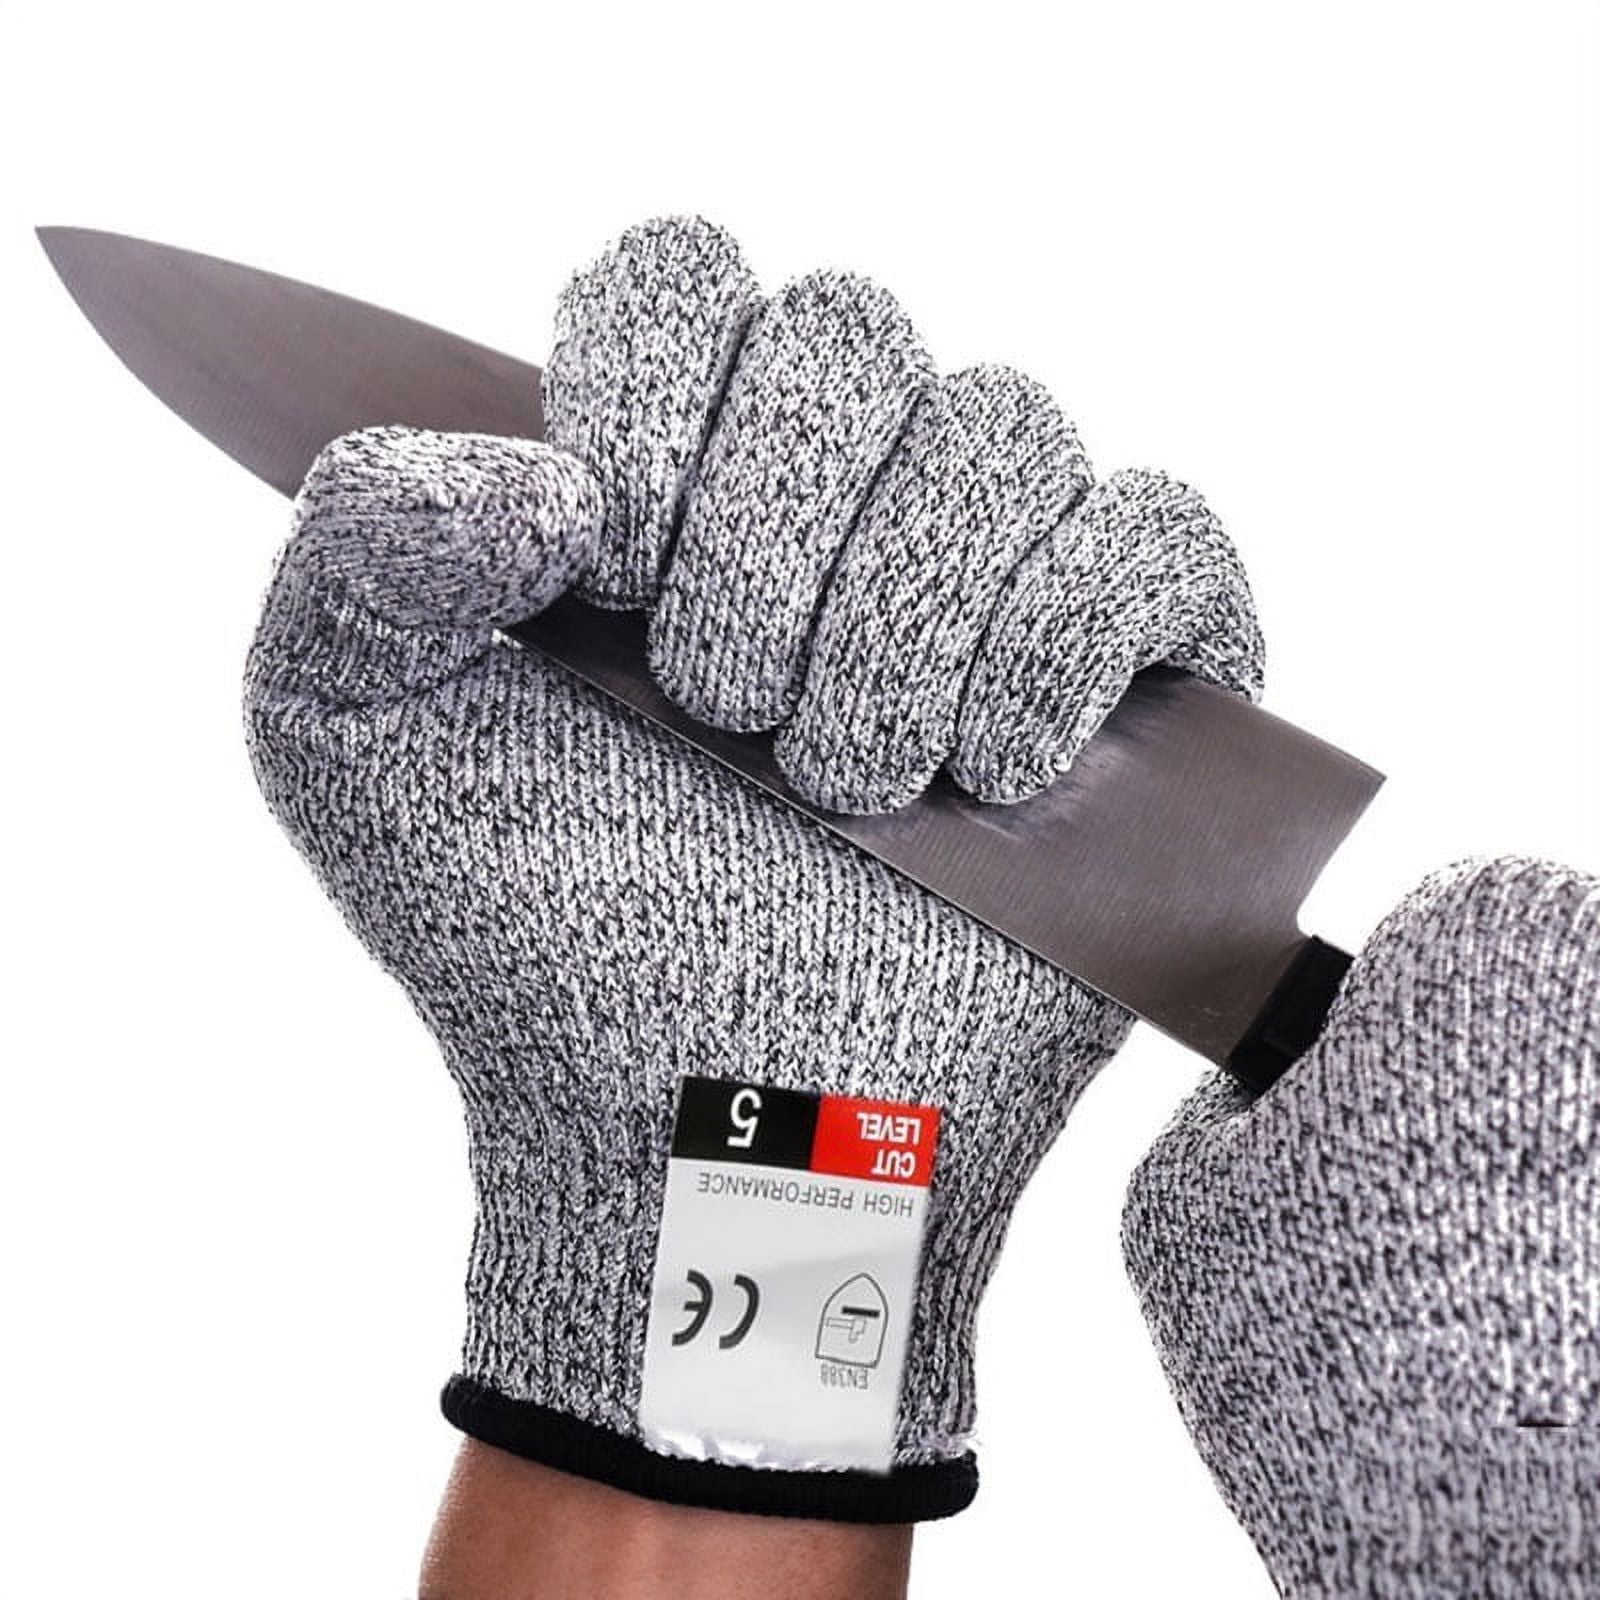 TECHTONGDA Cut Resistant Wear Gloves 1 Pair High Performance HPPE  Anti-Cutting Hand Protection Gloves for Kitchen Cutting, Slicing,  Yard-work, Wood Carving 